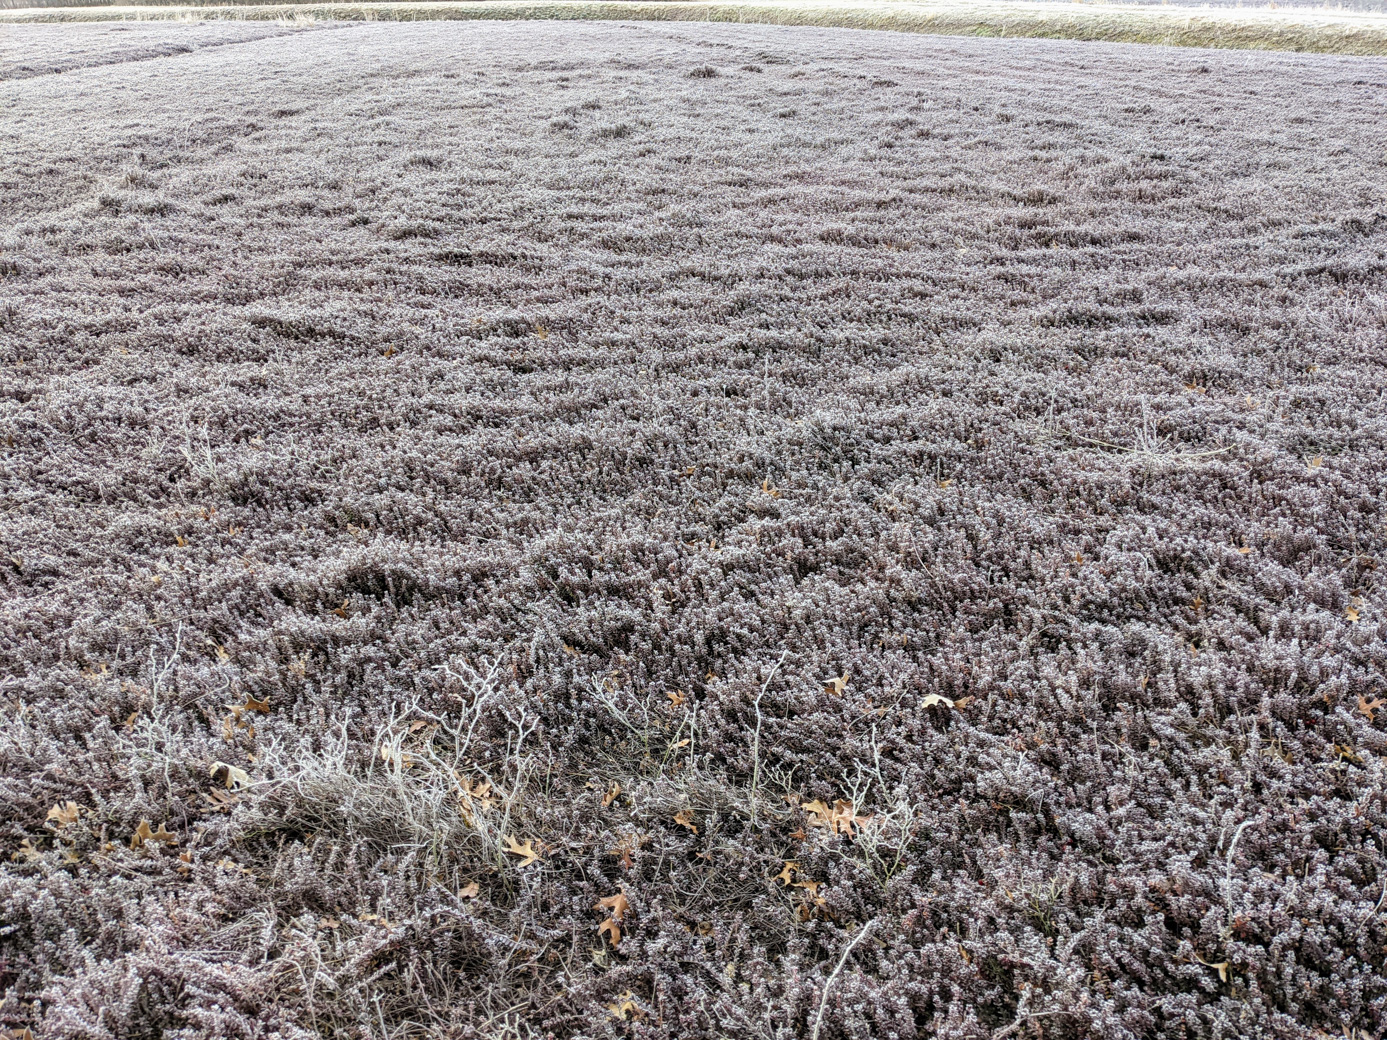 A view of a cranberry bog section with frost on the plants